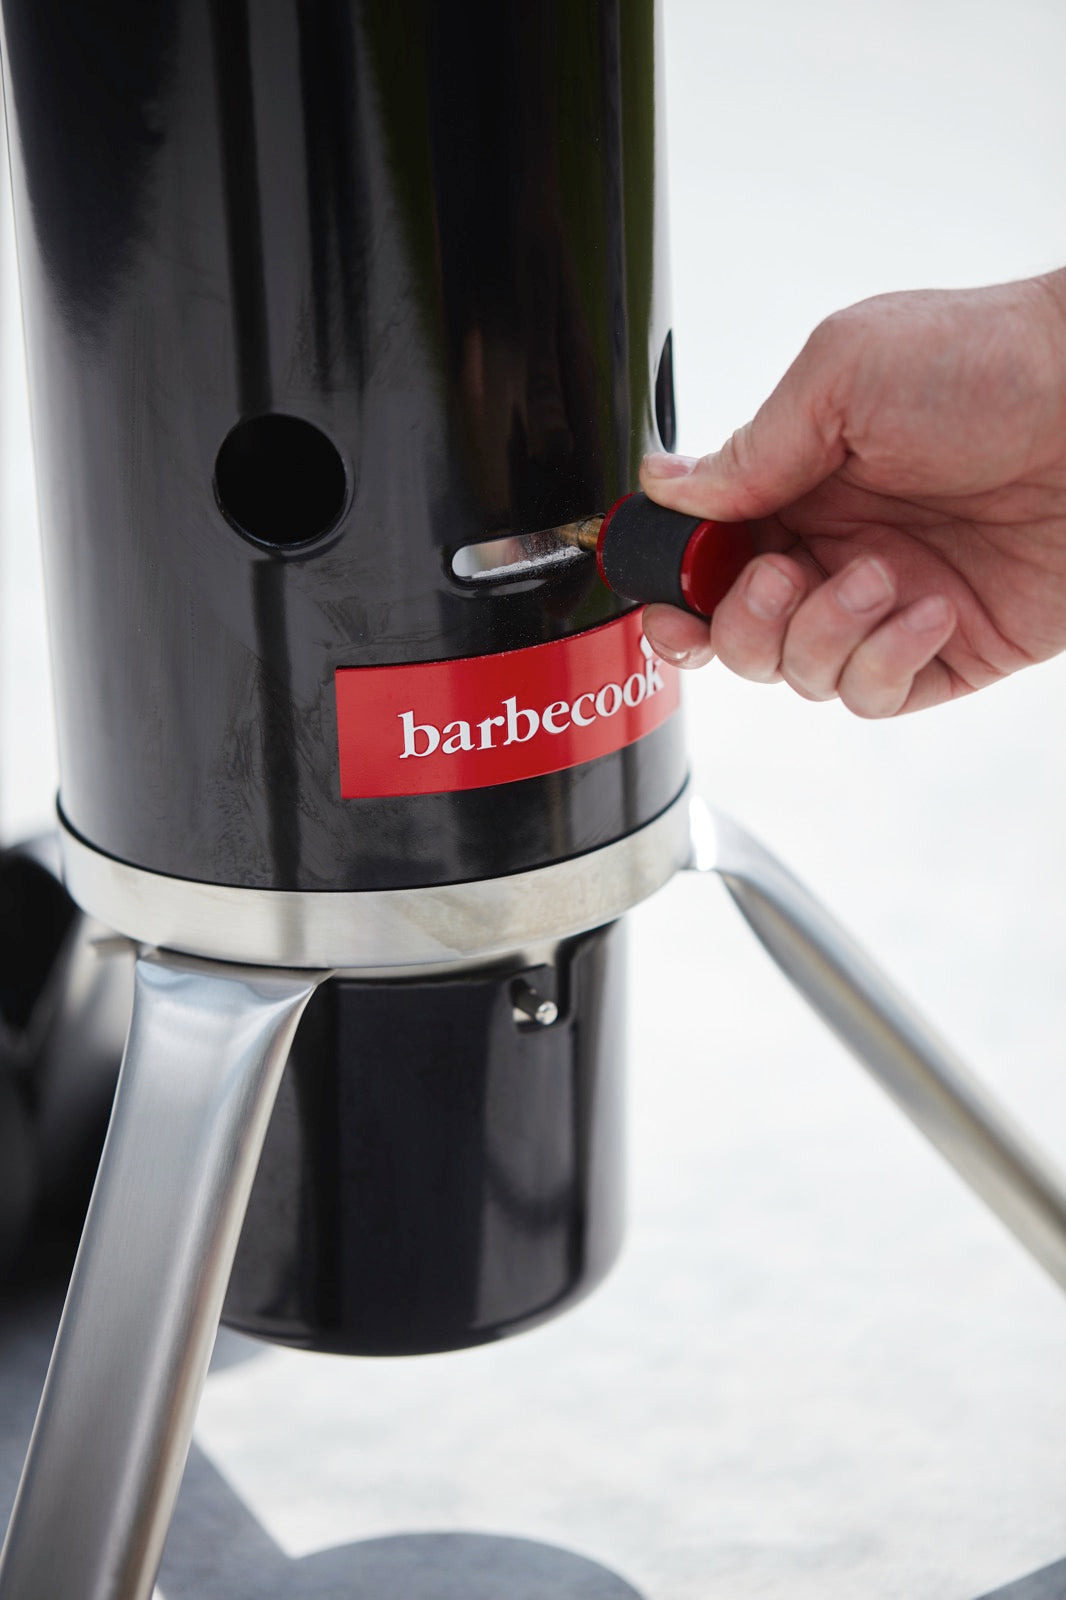 Lighting your barbecue in a safe, simple and quick way: the QuickStart® system